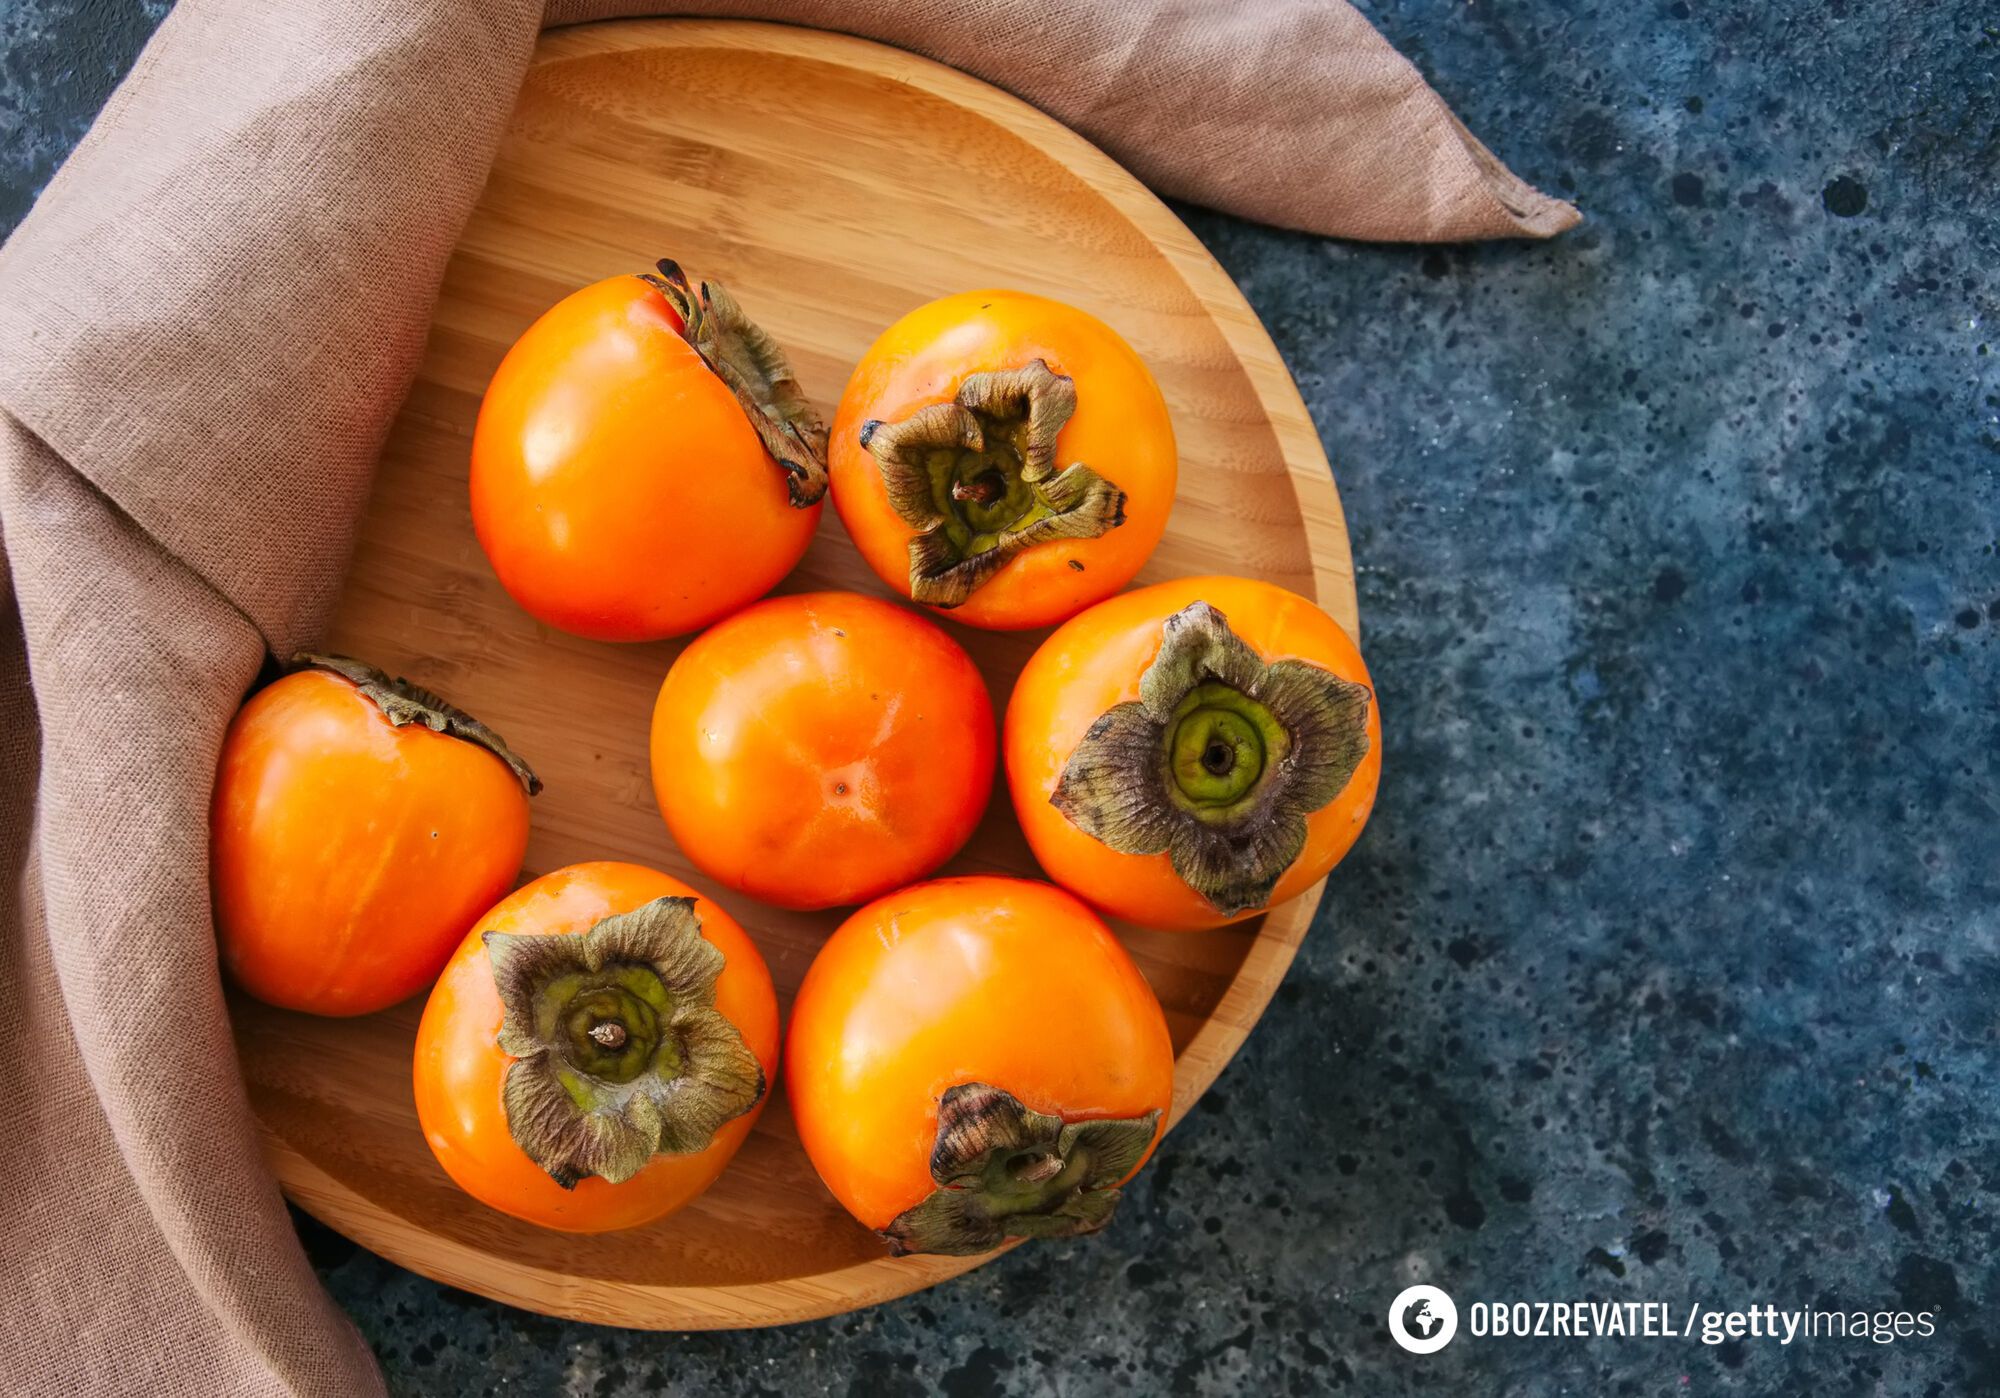 Persimmon supports blood sugar levels